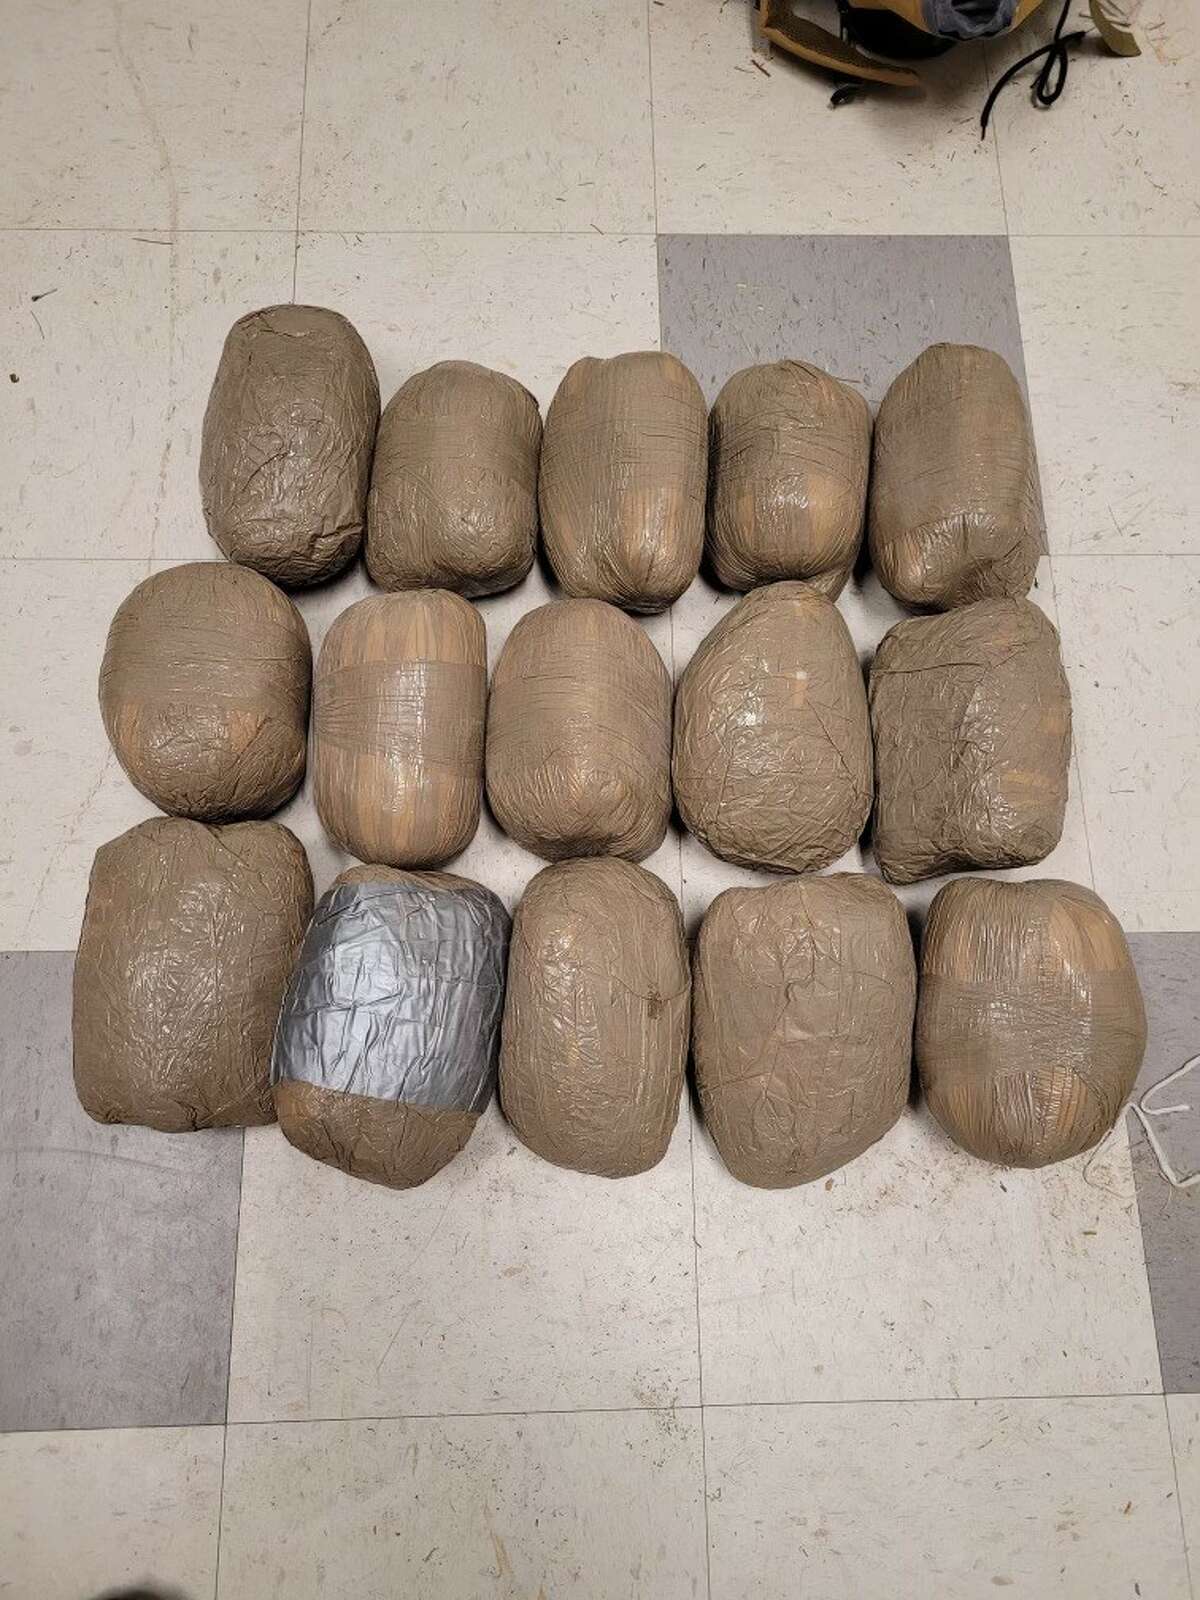 U.S. Border Patrol agents along with the assistance of the Texas Department of Public Safety seized 15 packages of methamphetamine valued at $1.46 million near Van Horn, Texas on Monday, May 23, 2023.